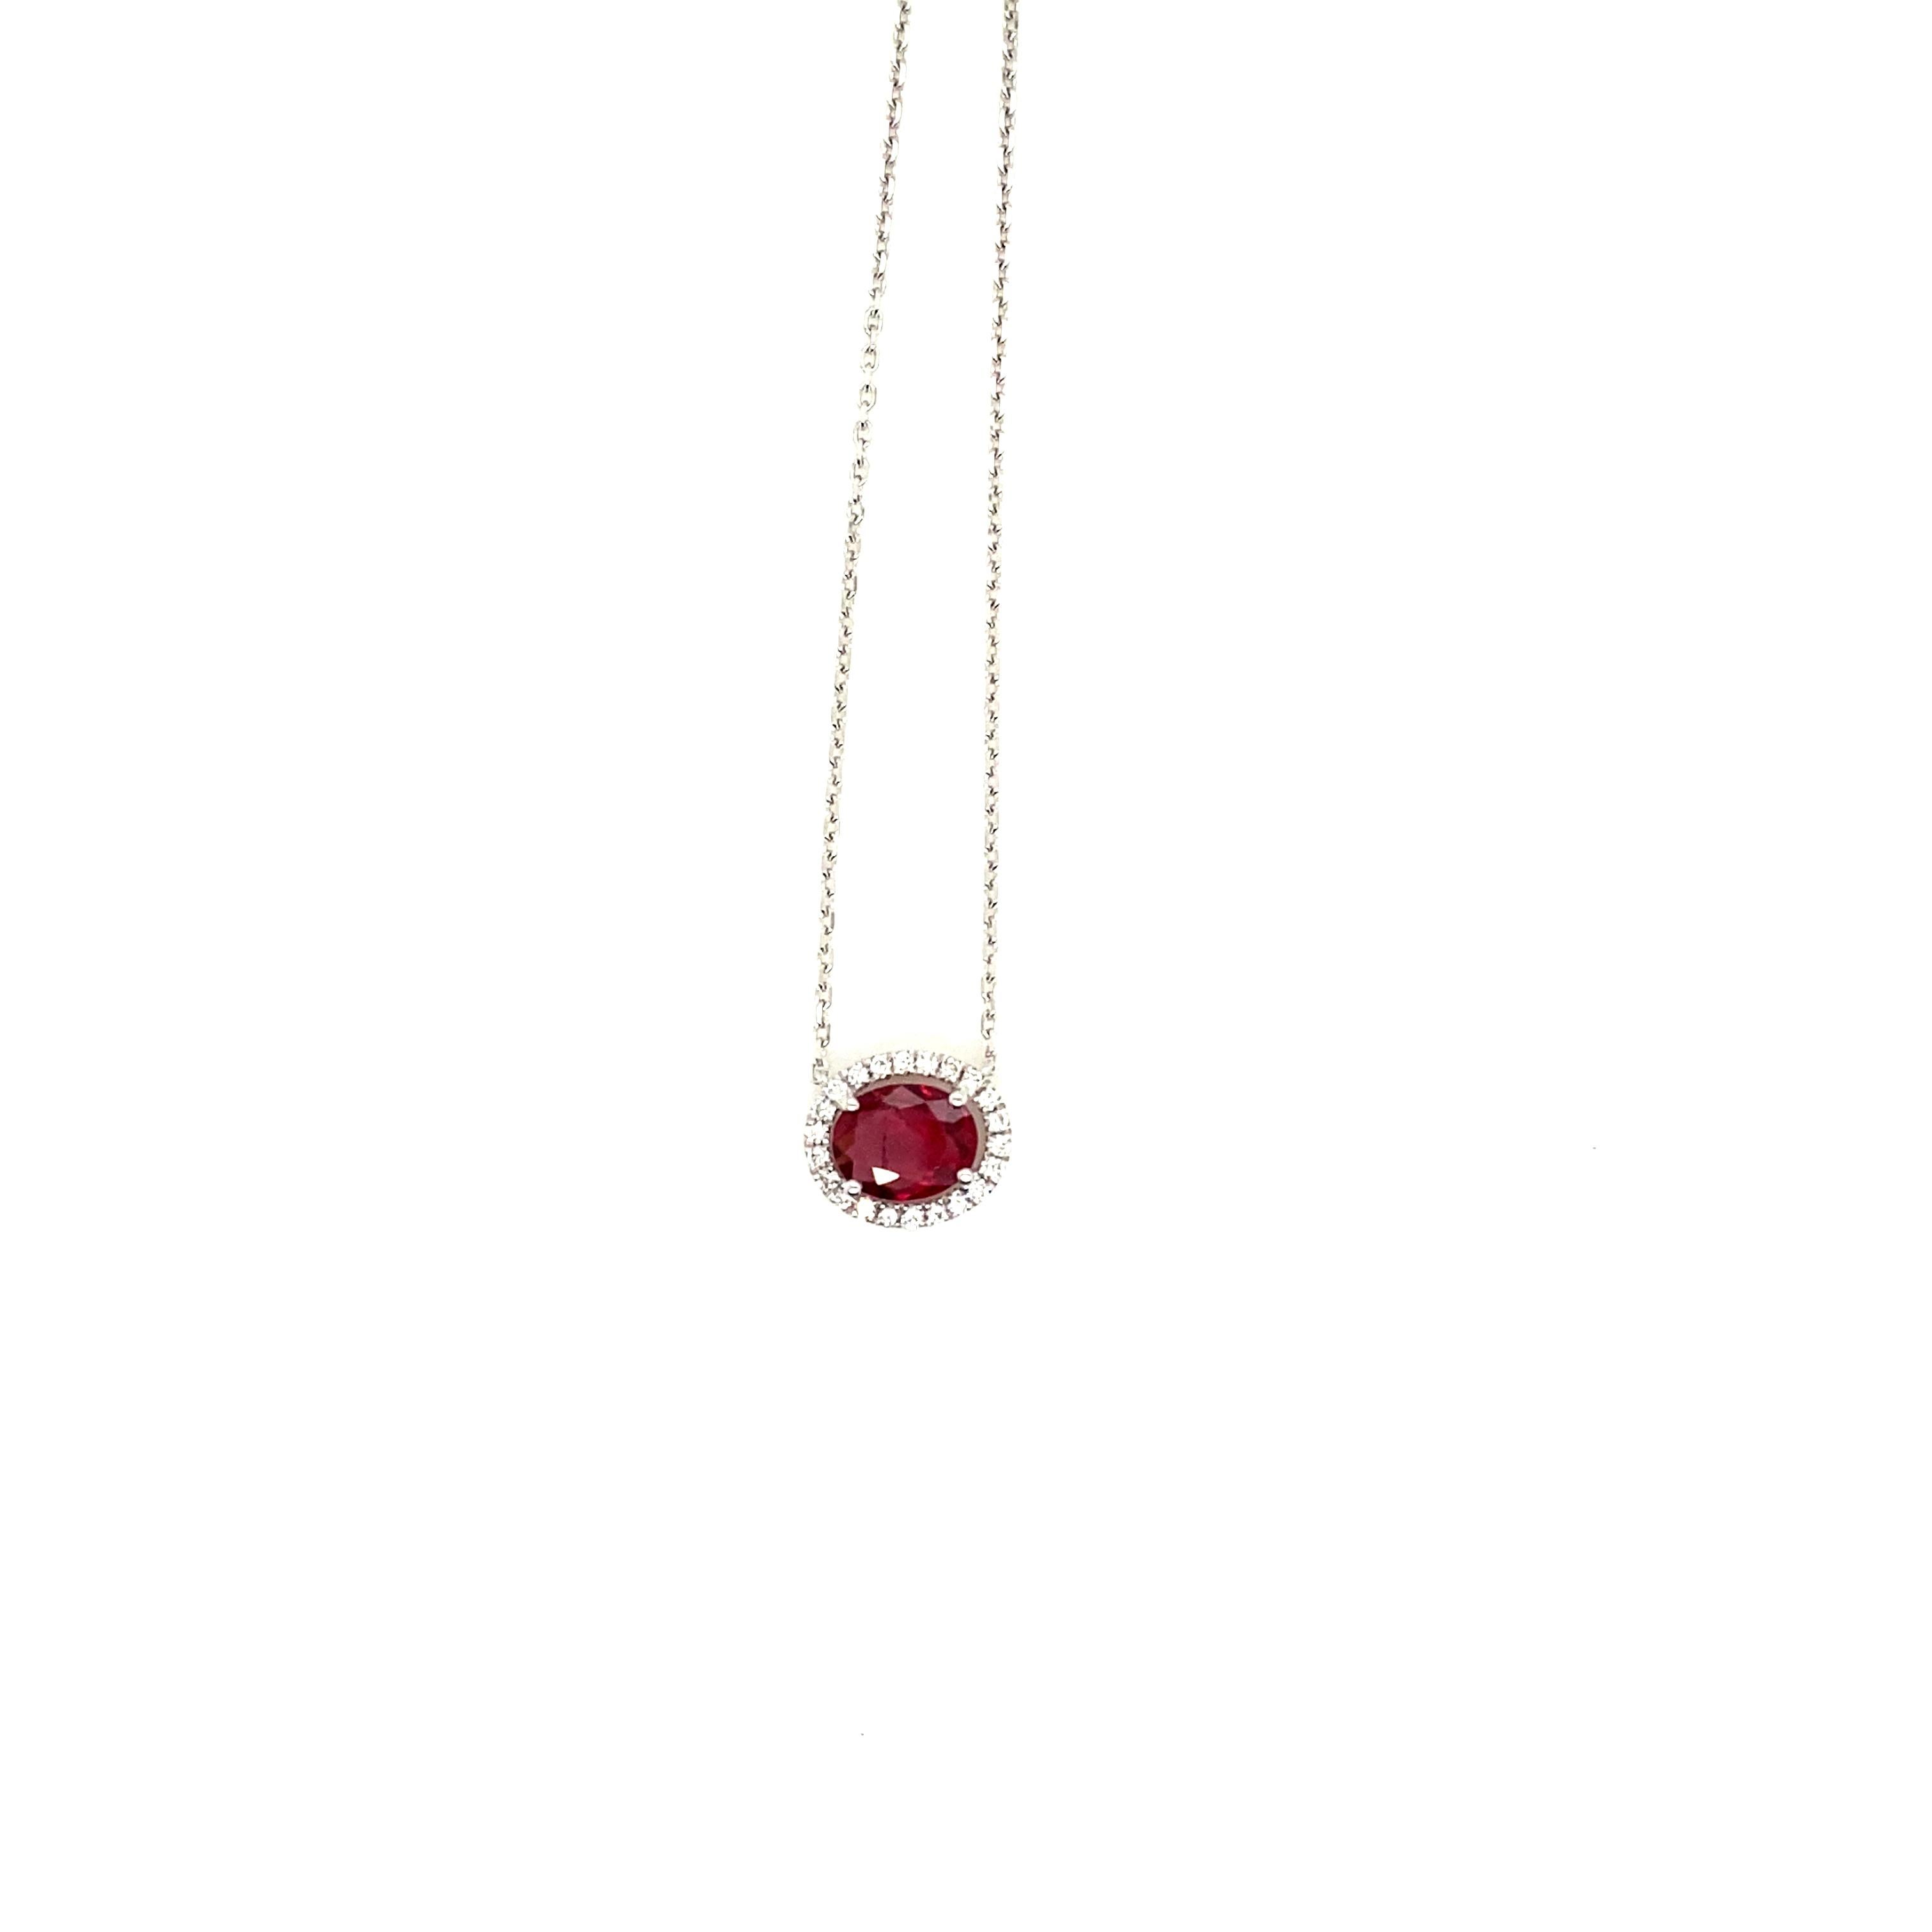 Modern 1.16 Carat Oval-Cut Intense Red Ruby and White Diamond Pendant Necklace For Sale